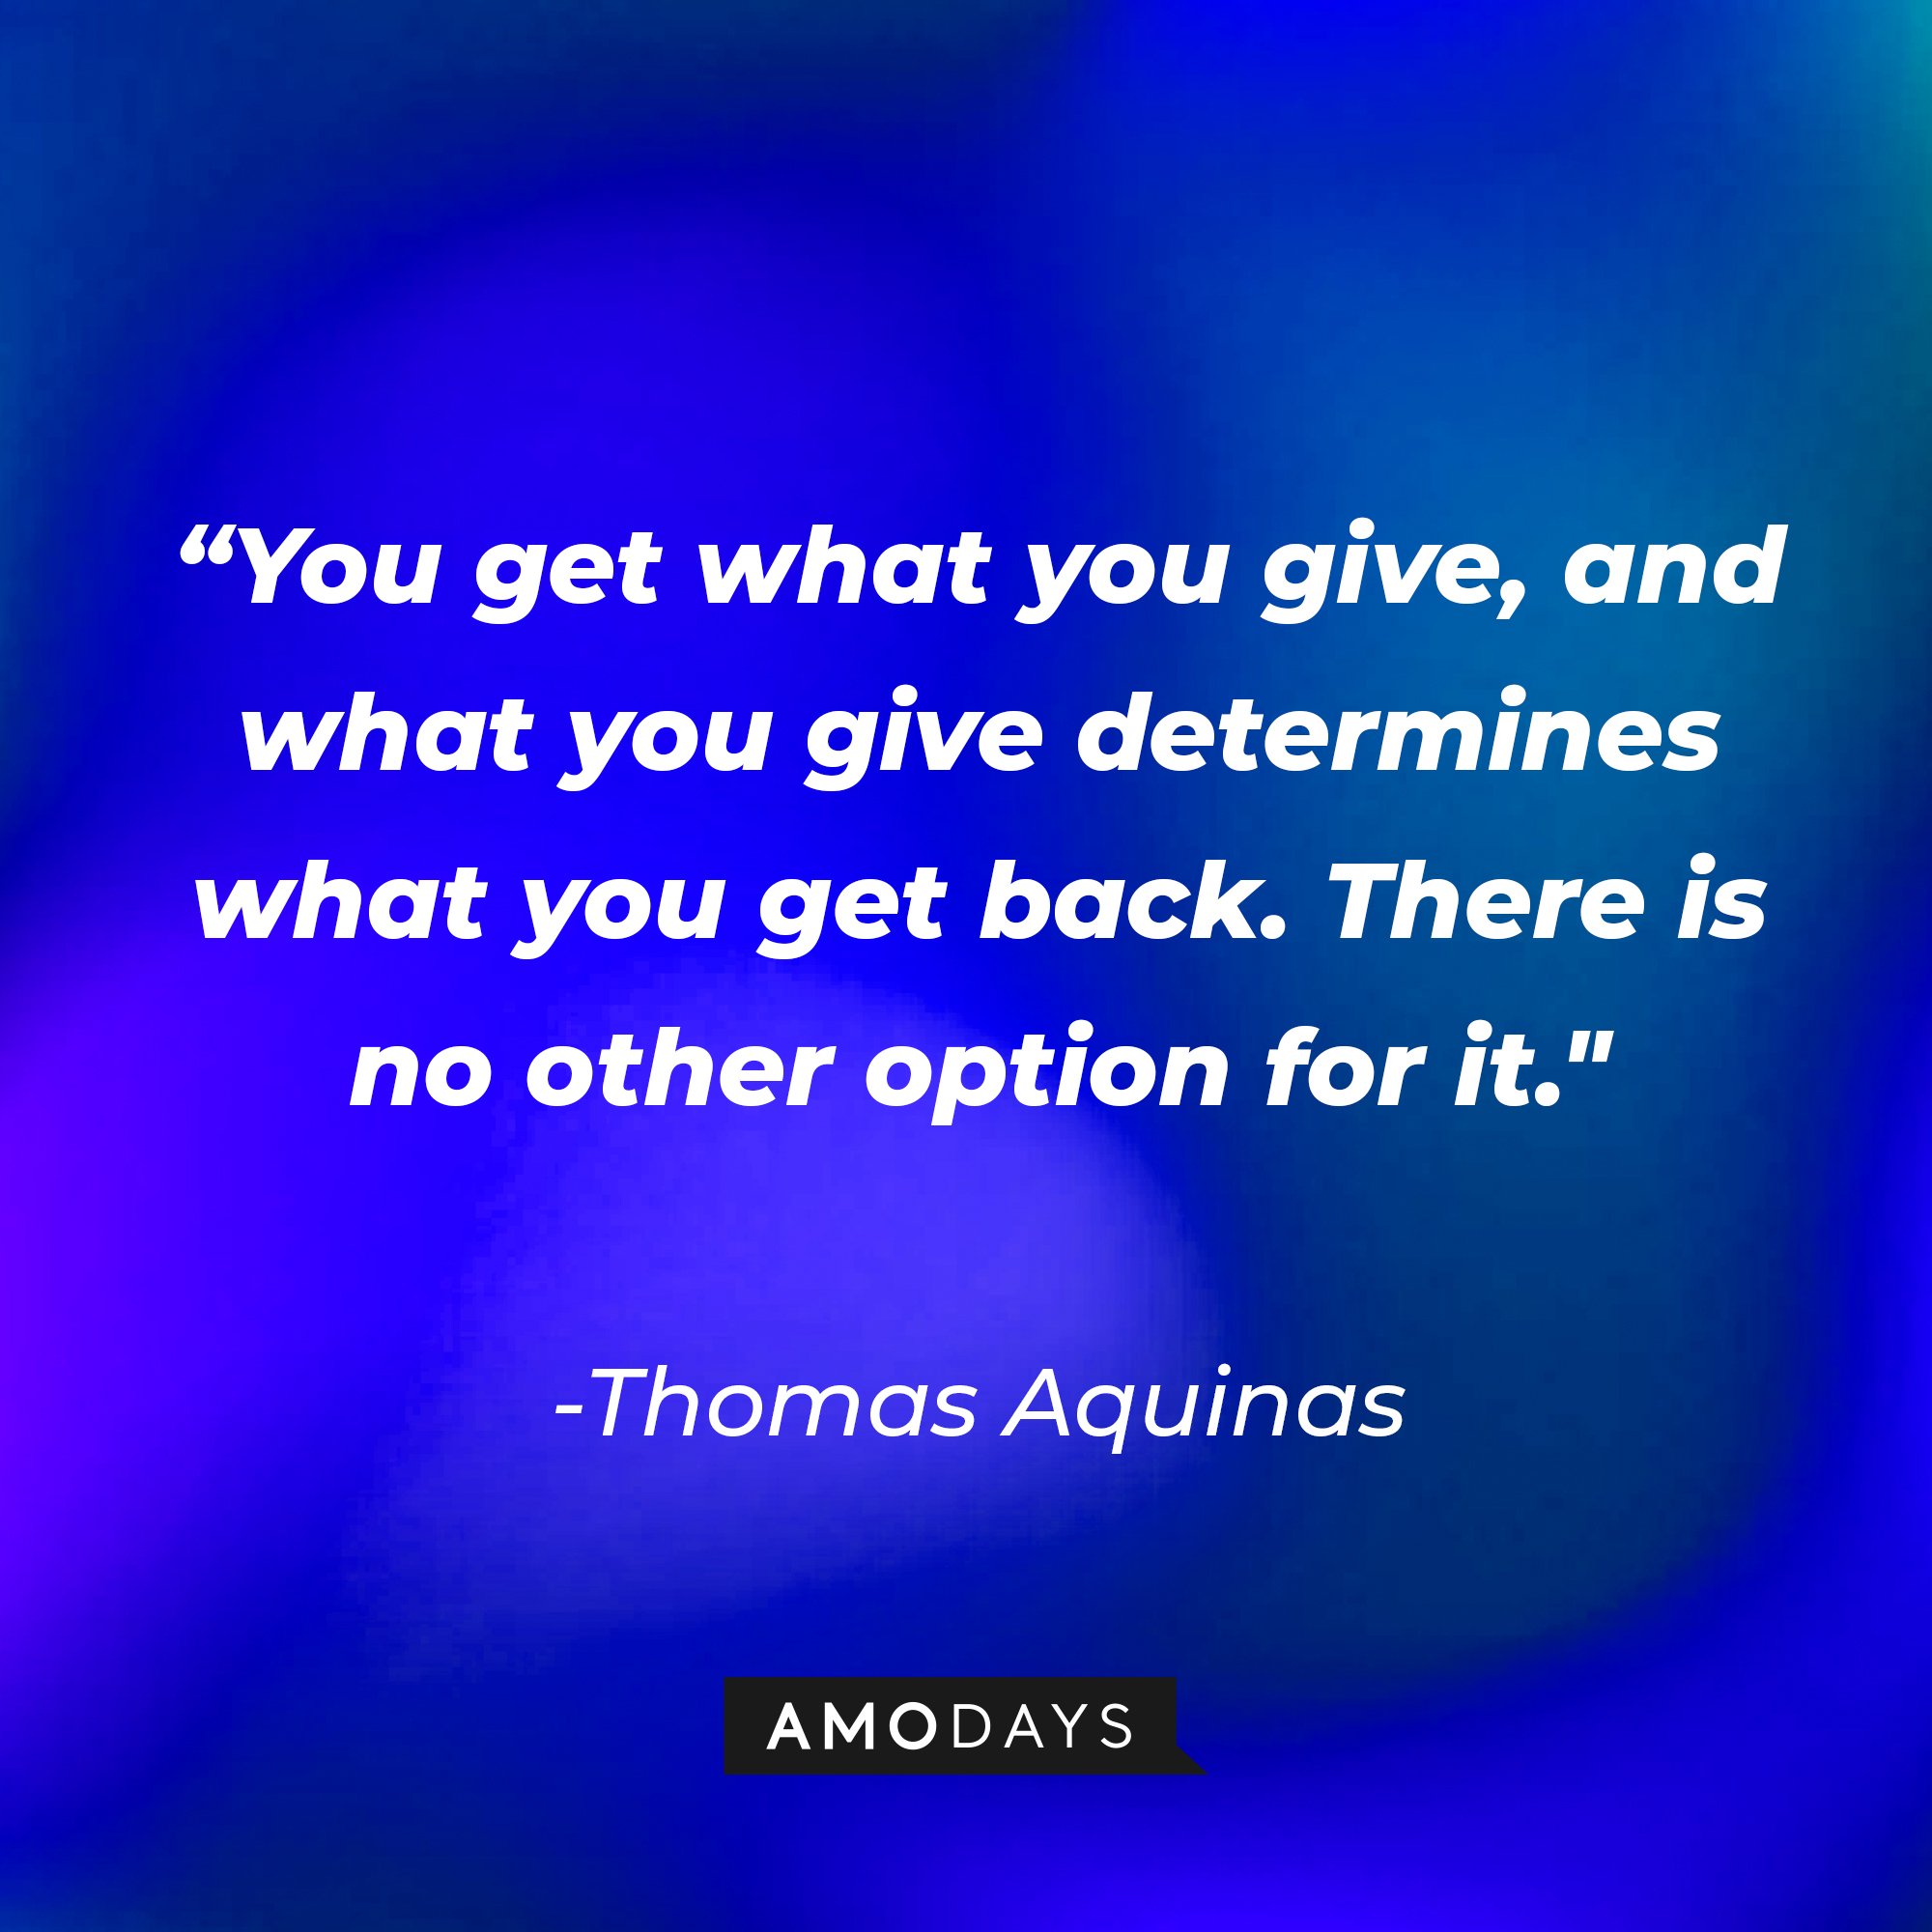 Thomas Aquinas’ quote: “You get what you give, and what you give determines what you get back. There is no other option for it." | Image: AmoDays